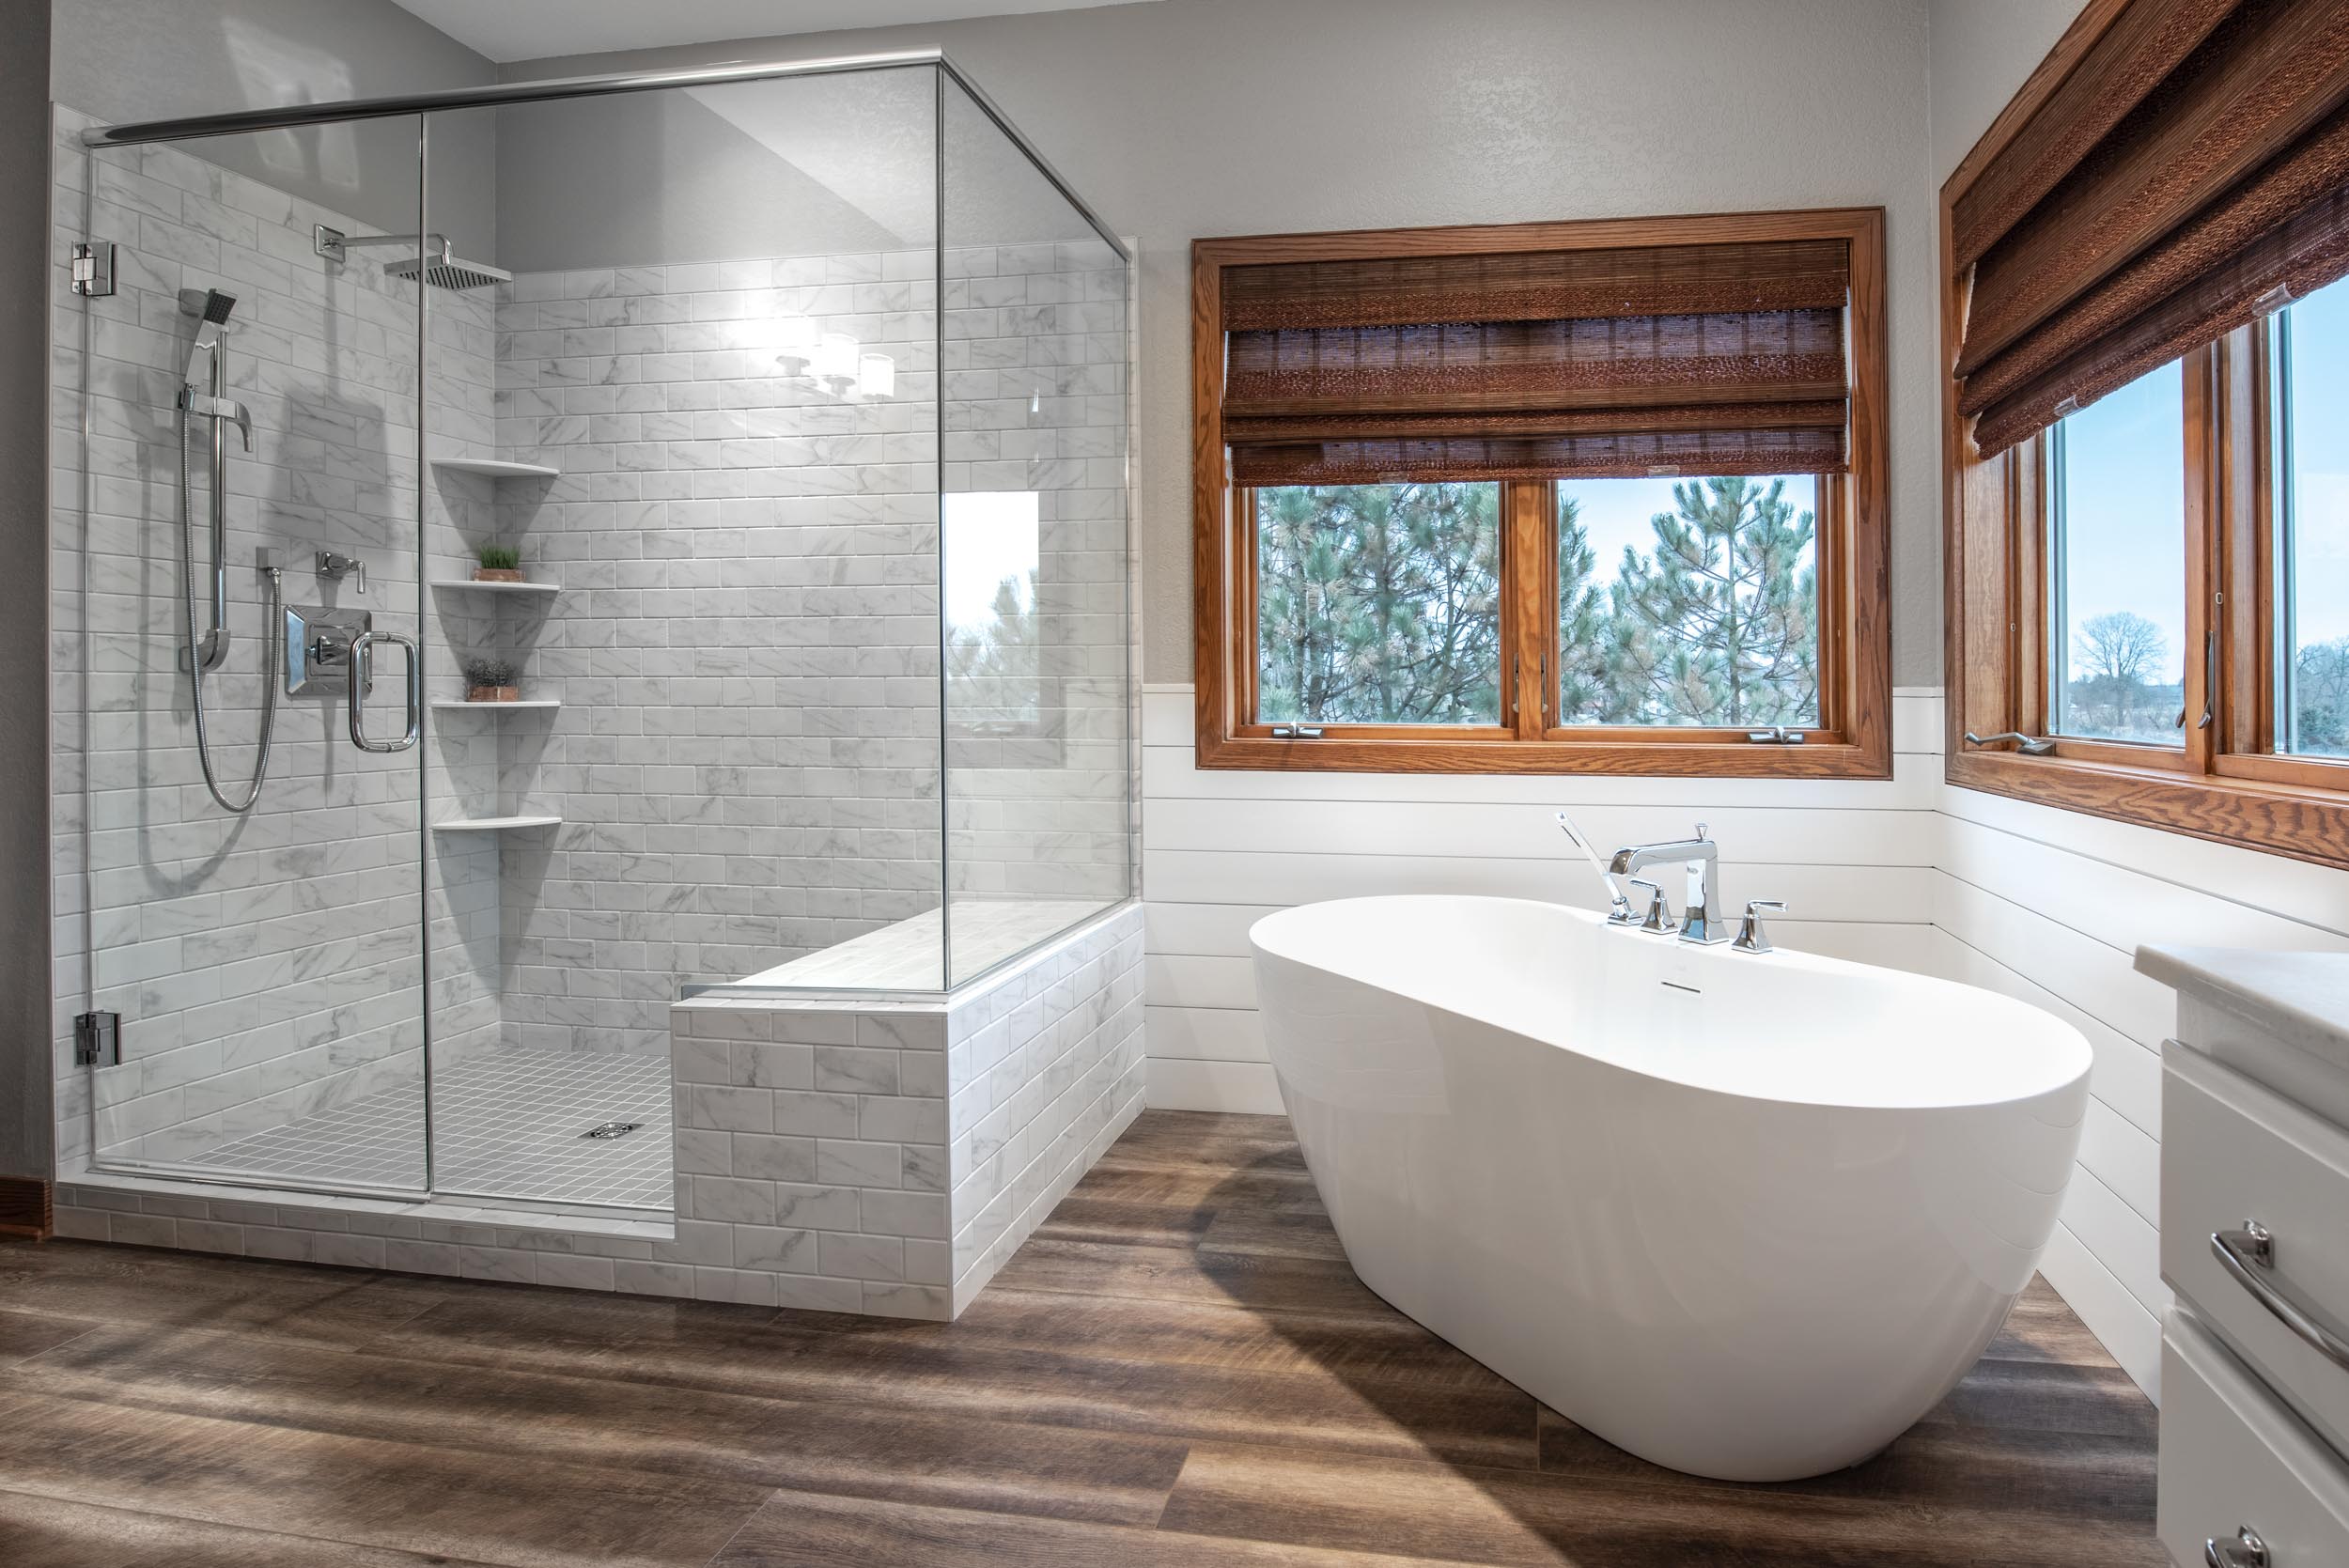 The Of A Bathroom Remodeling, Basement Bathroom Remodel Cost